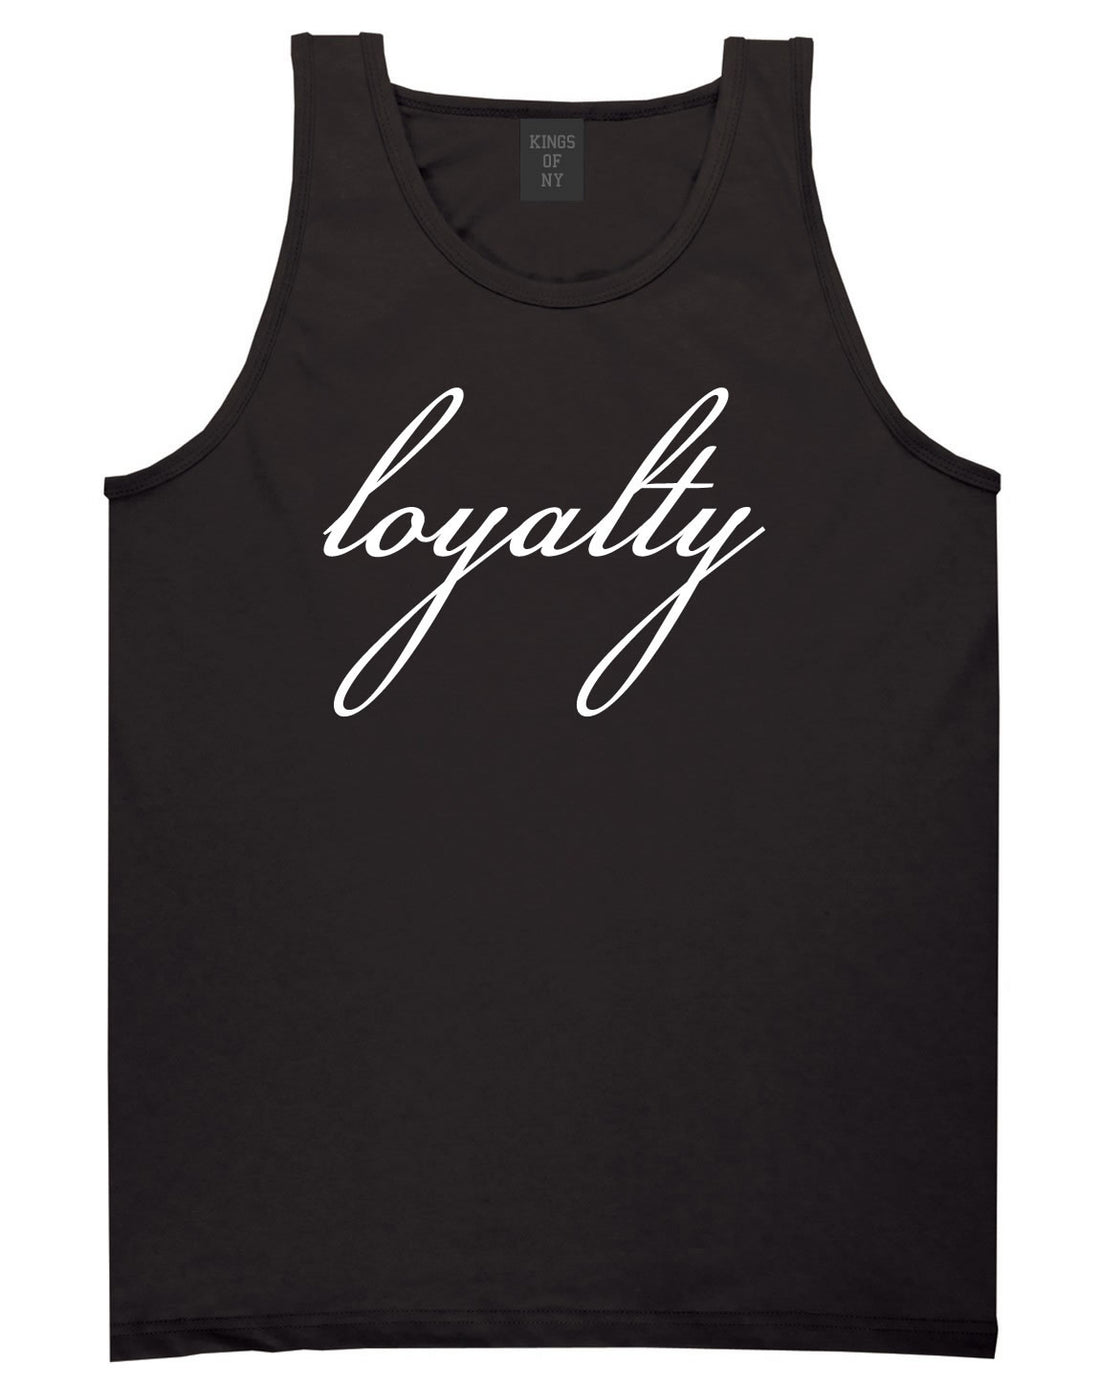 Loyalty Respect Aint New York Hoes Tank Top In Black by Kings Of NY